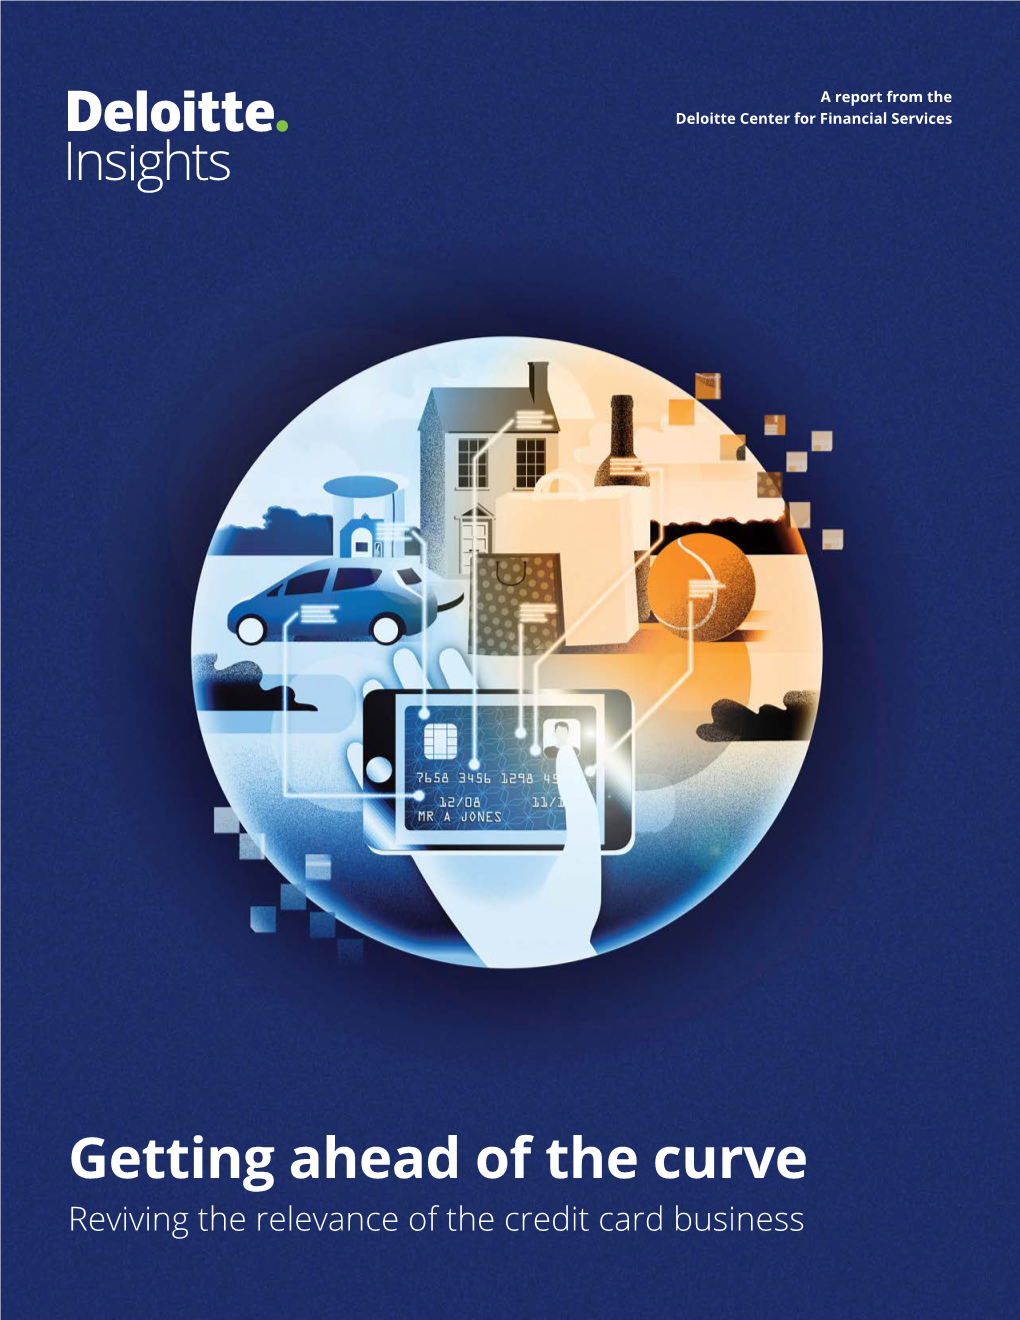 Deloitte Insights: Getting Ahead of the Curve